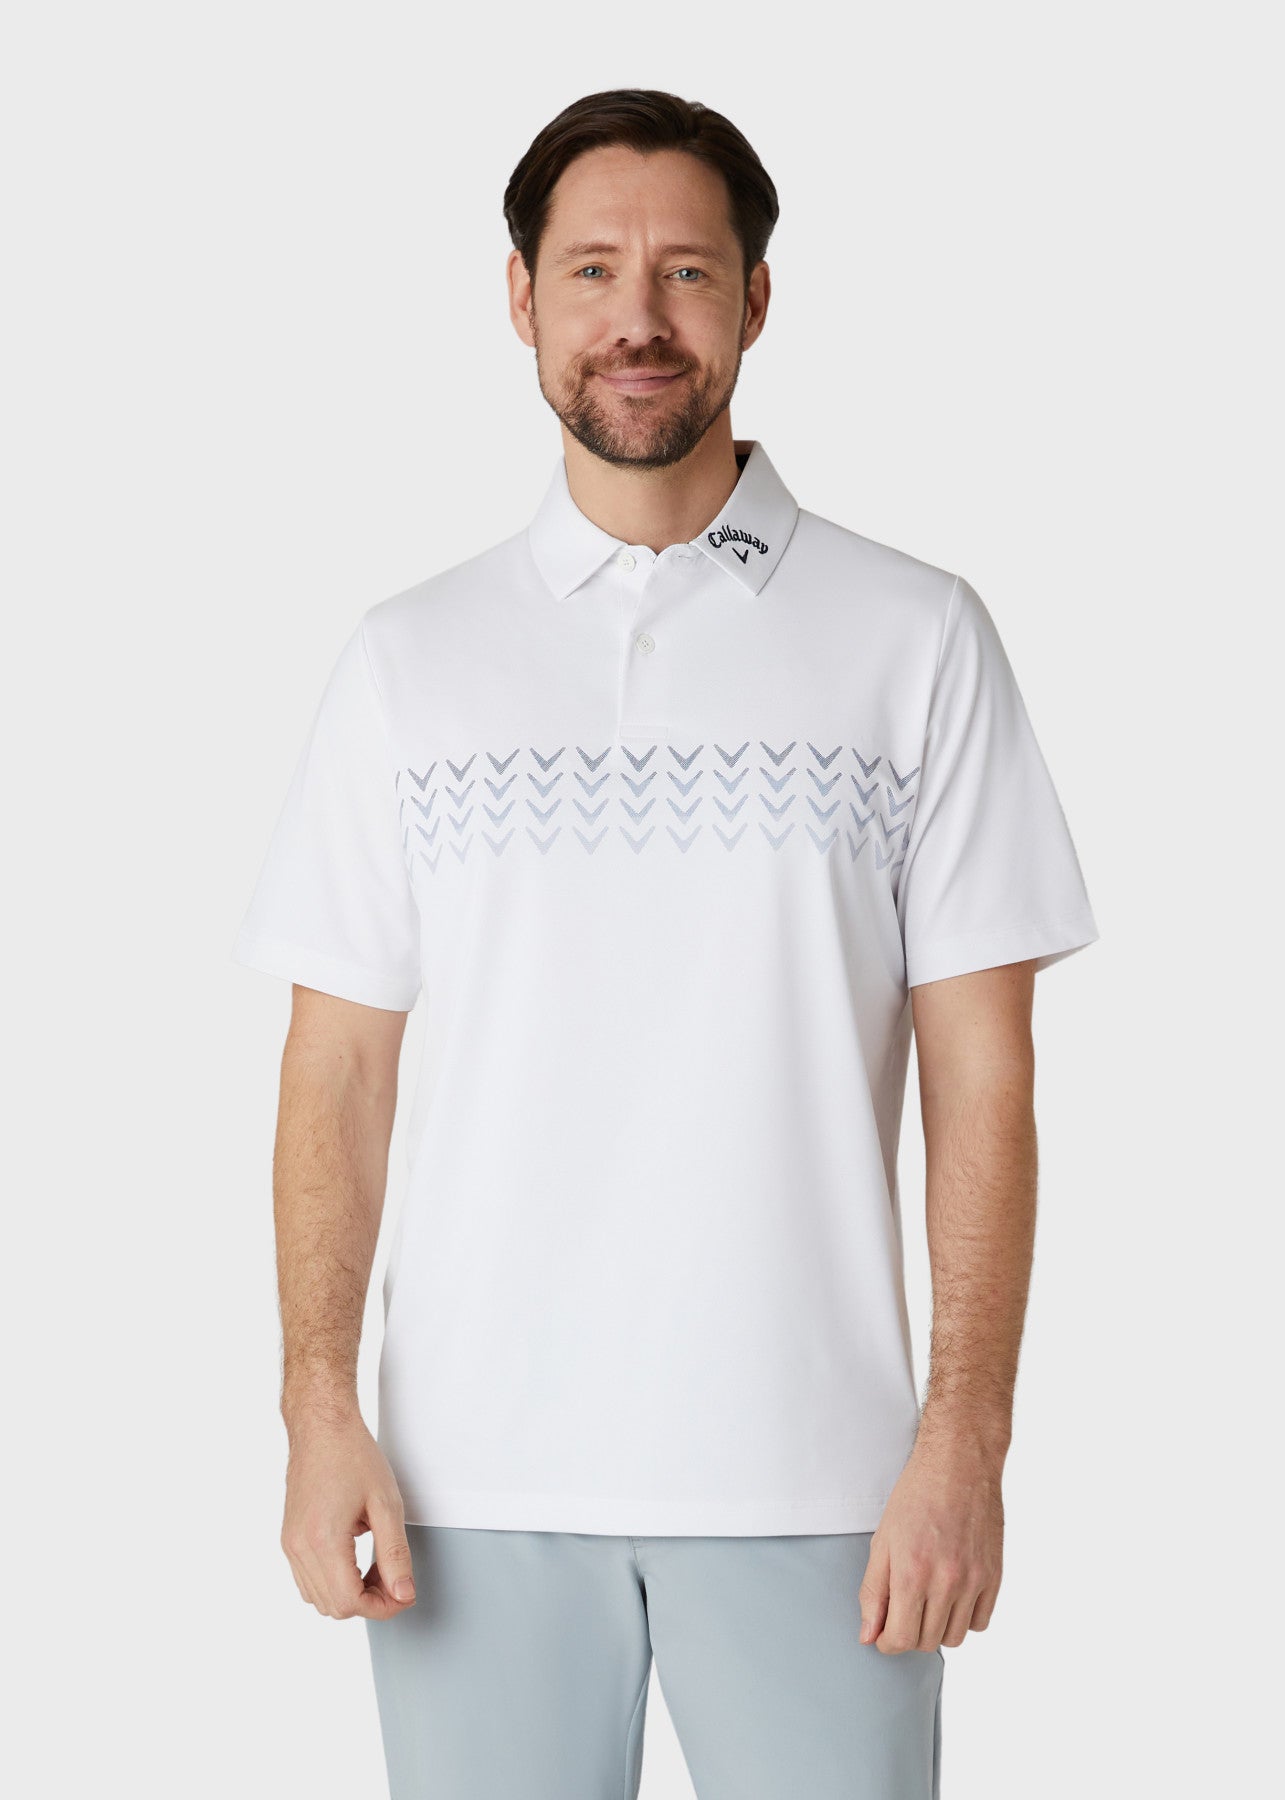 View Short Sleeve Trademark Chev Block Print Polo Shirt In Bright White information